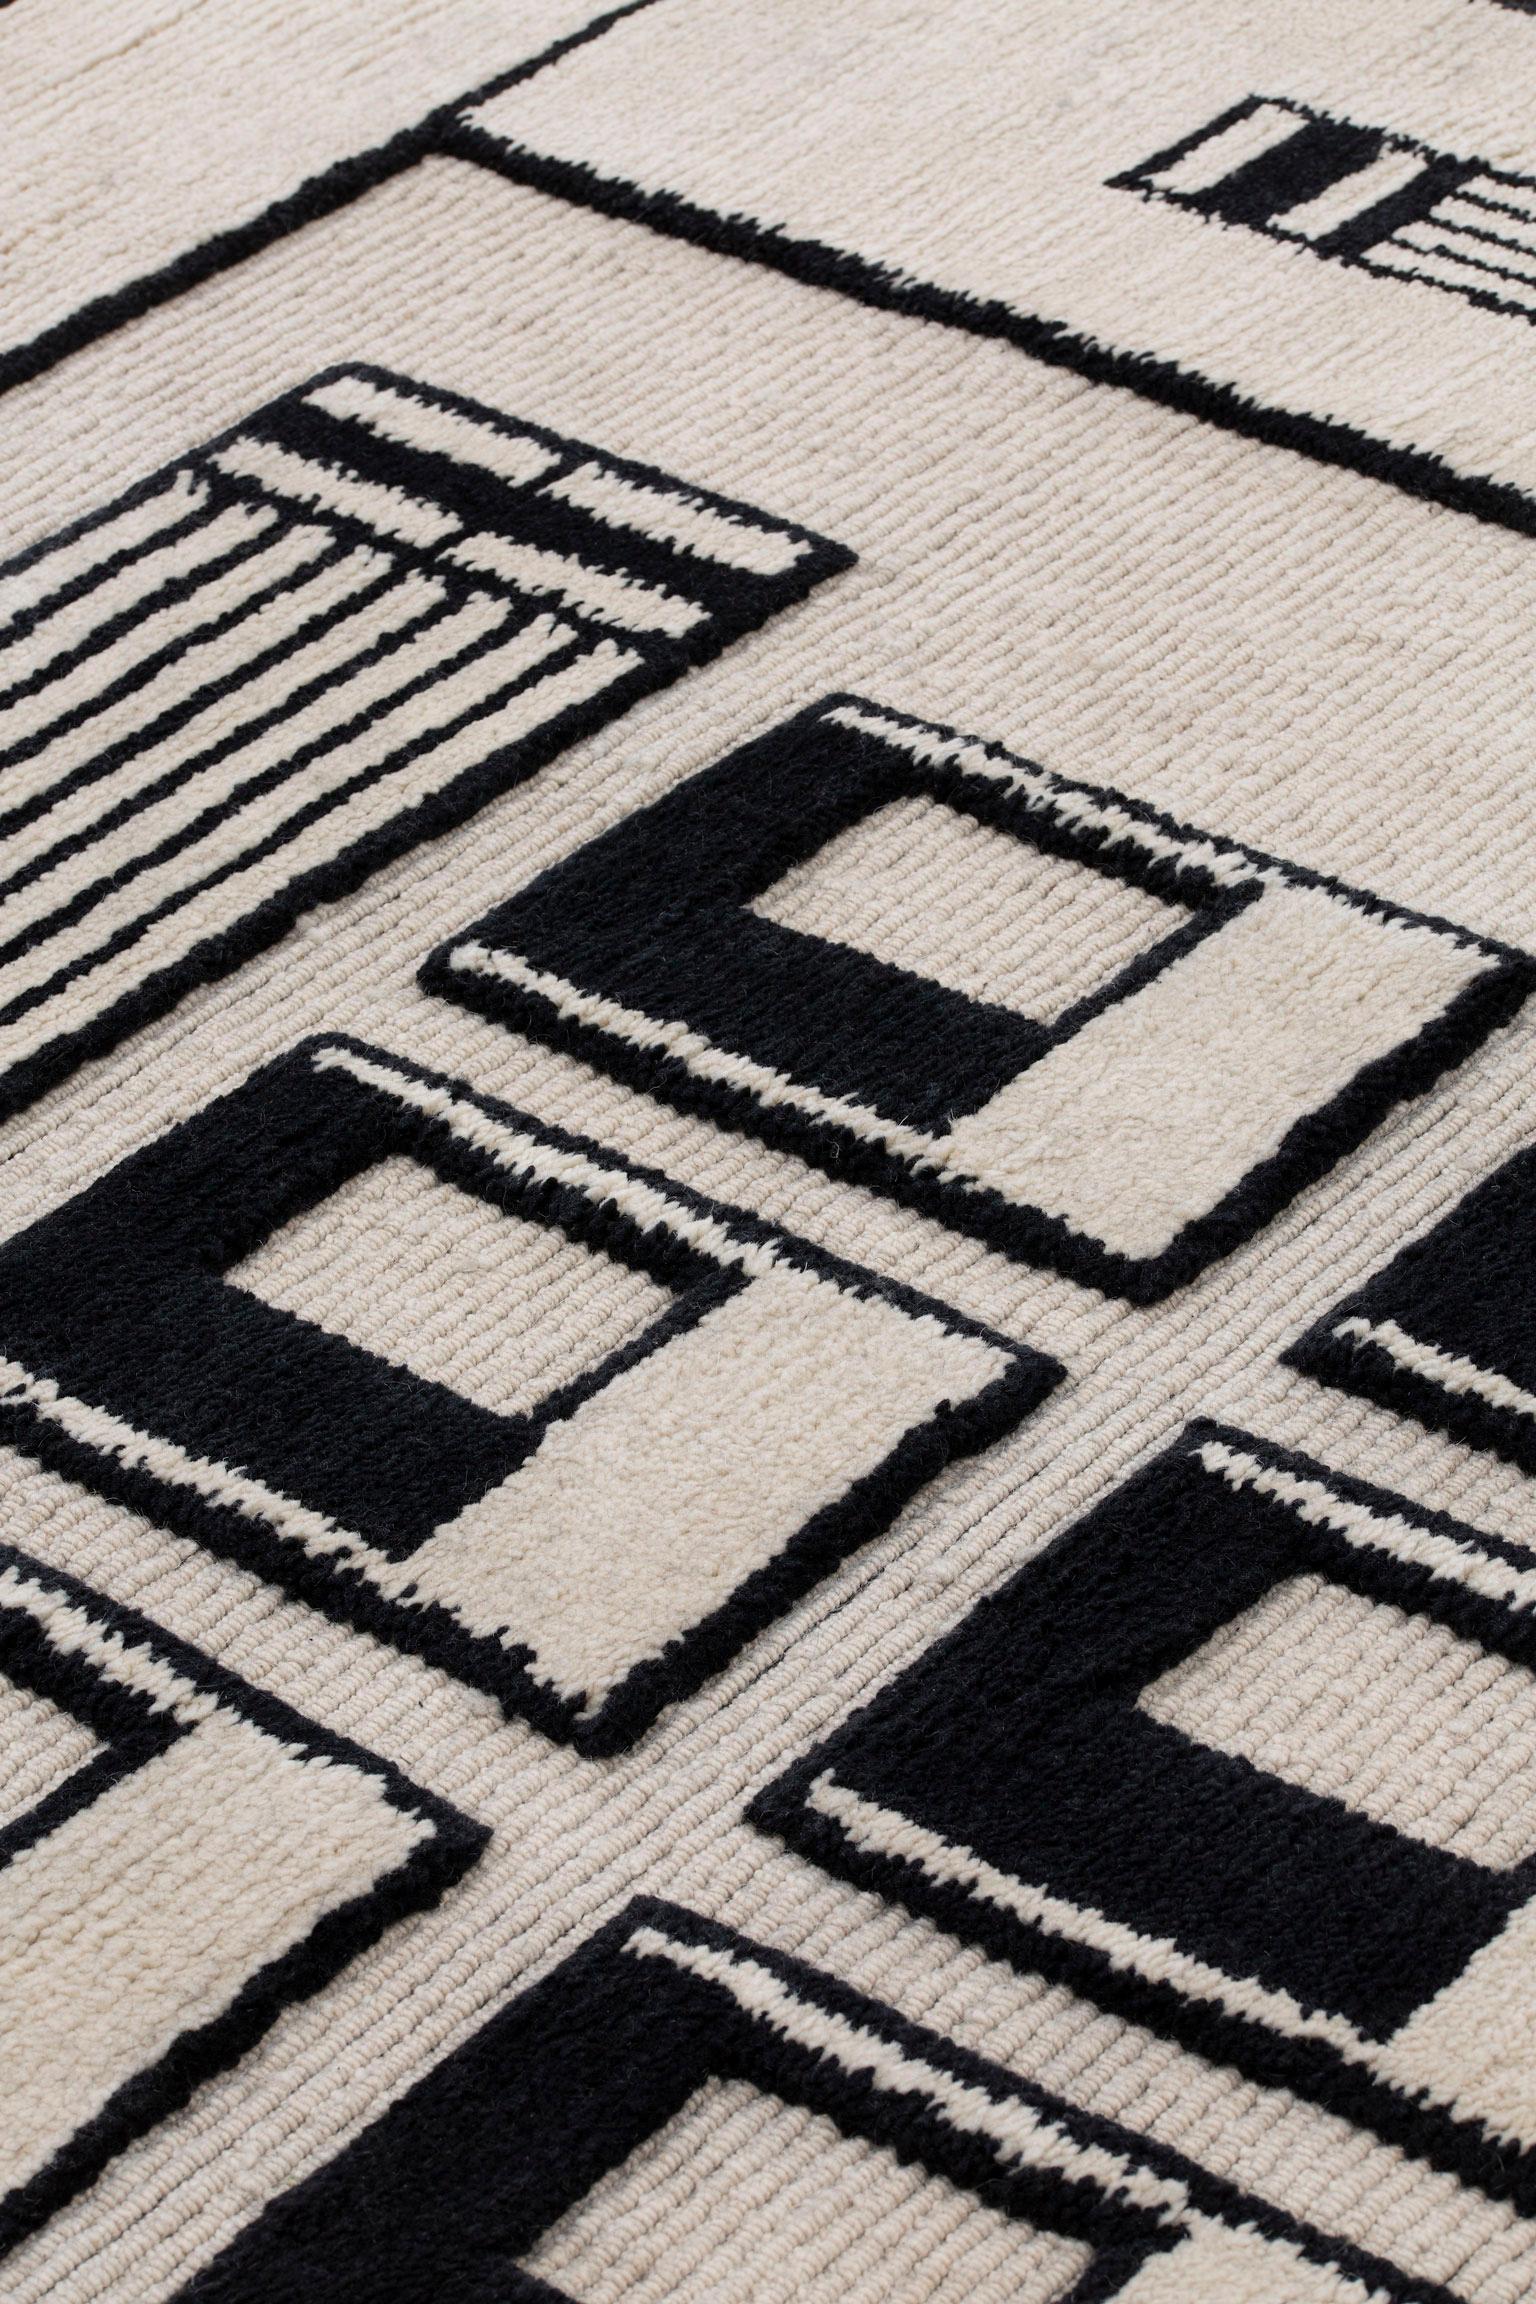 Asmara Collection by Federico Pepe, a tribute to the capital of Eritrea, the UNESCO World Heritage Site known for its futurist architecture. An innovative urbanistic utopia applied to an African context, which is evoked in the design of each rug in